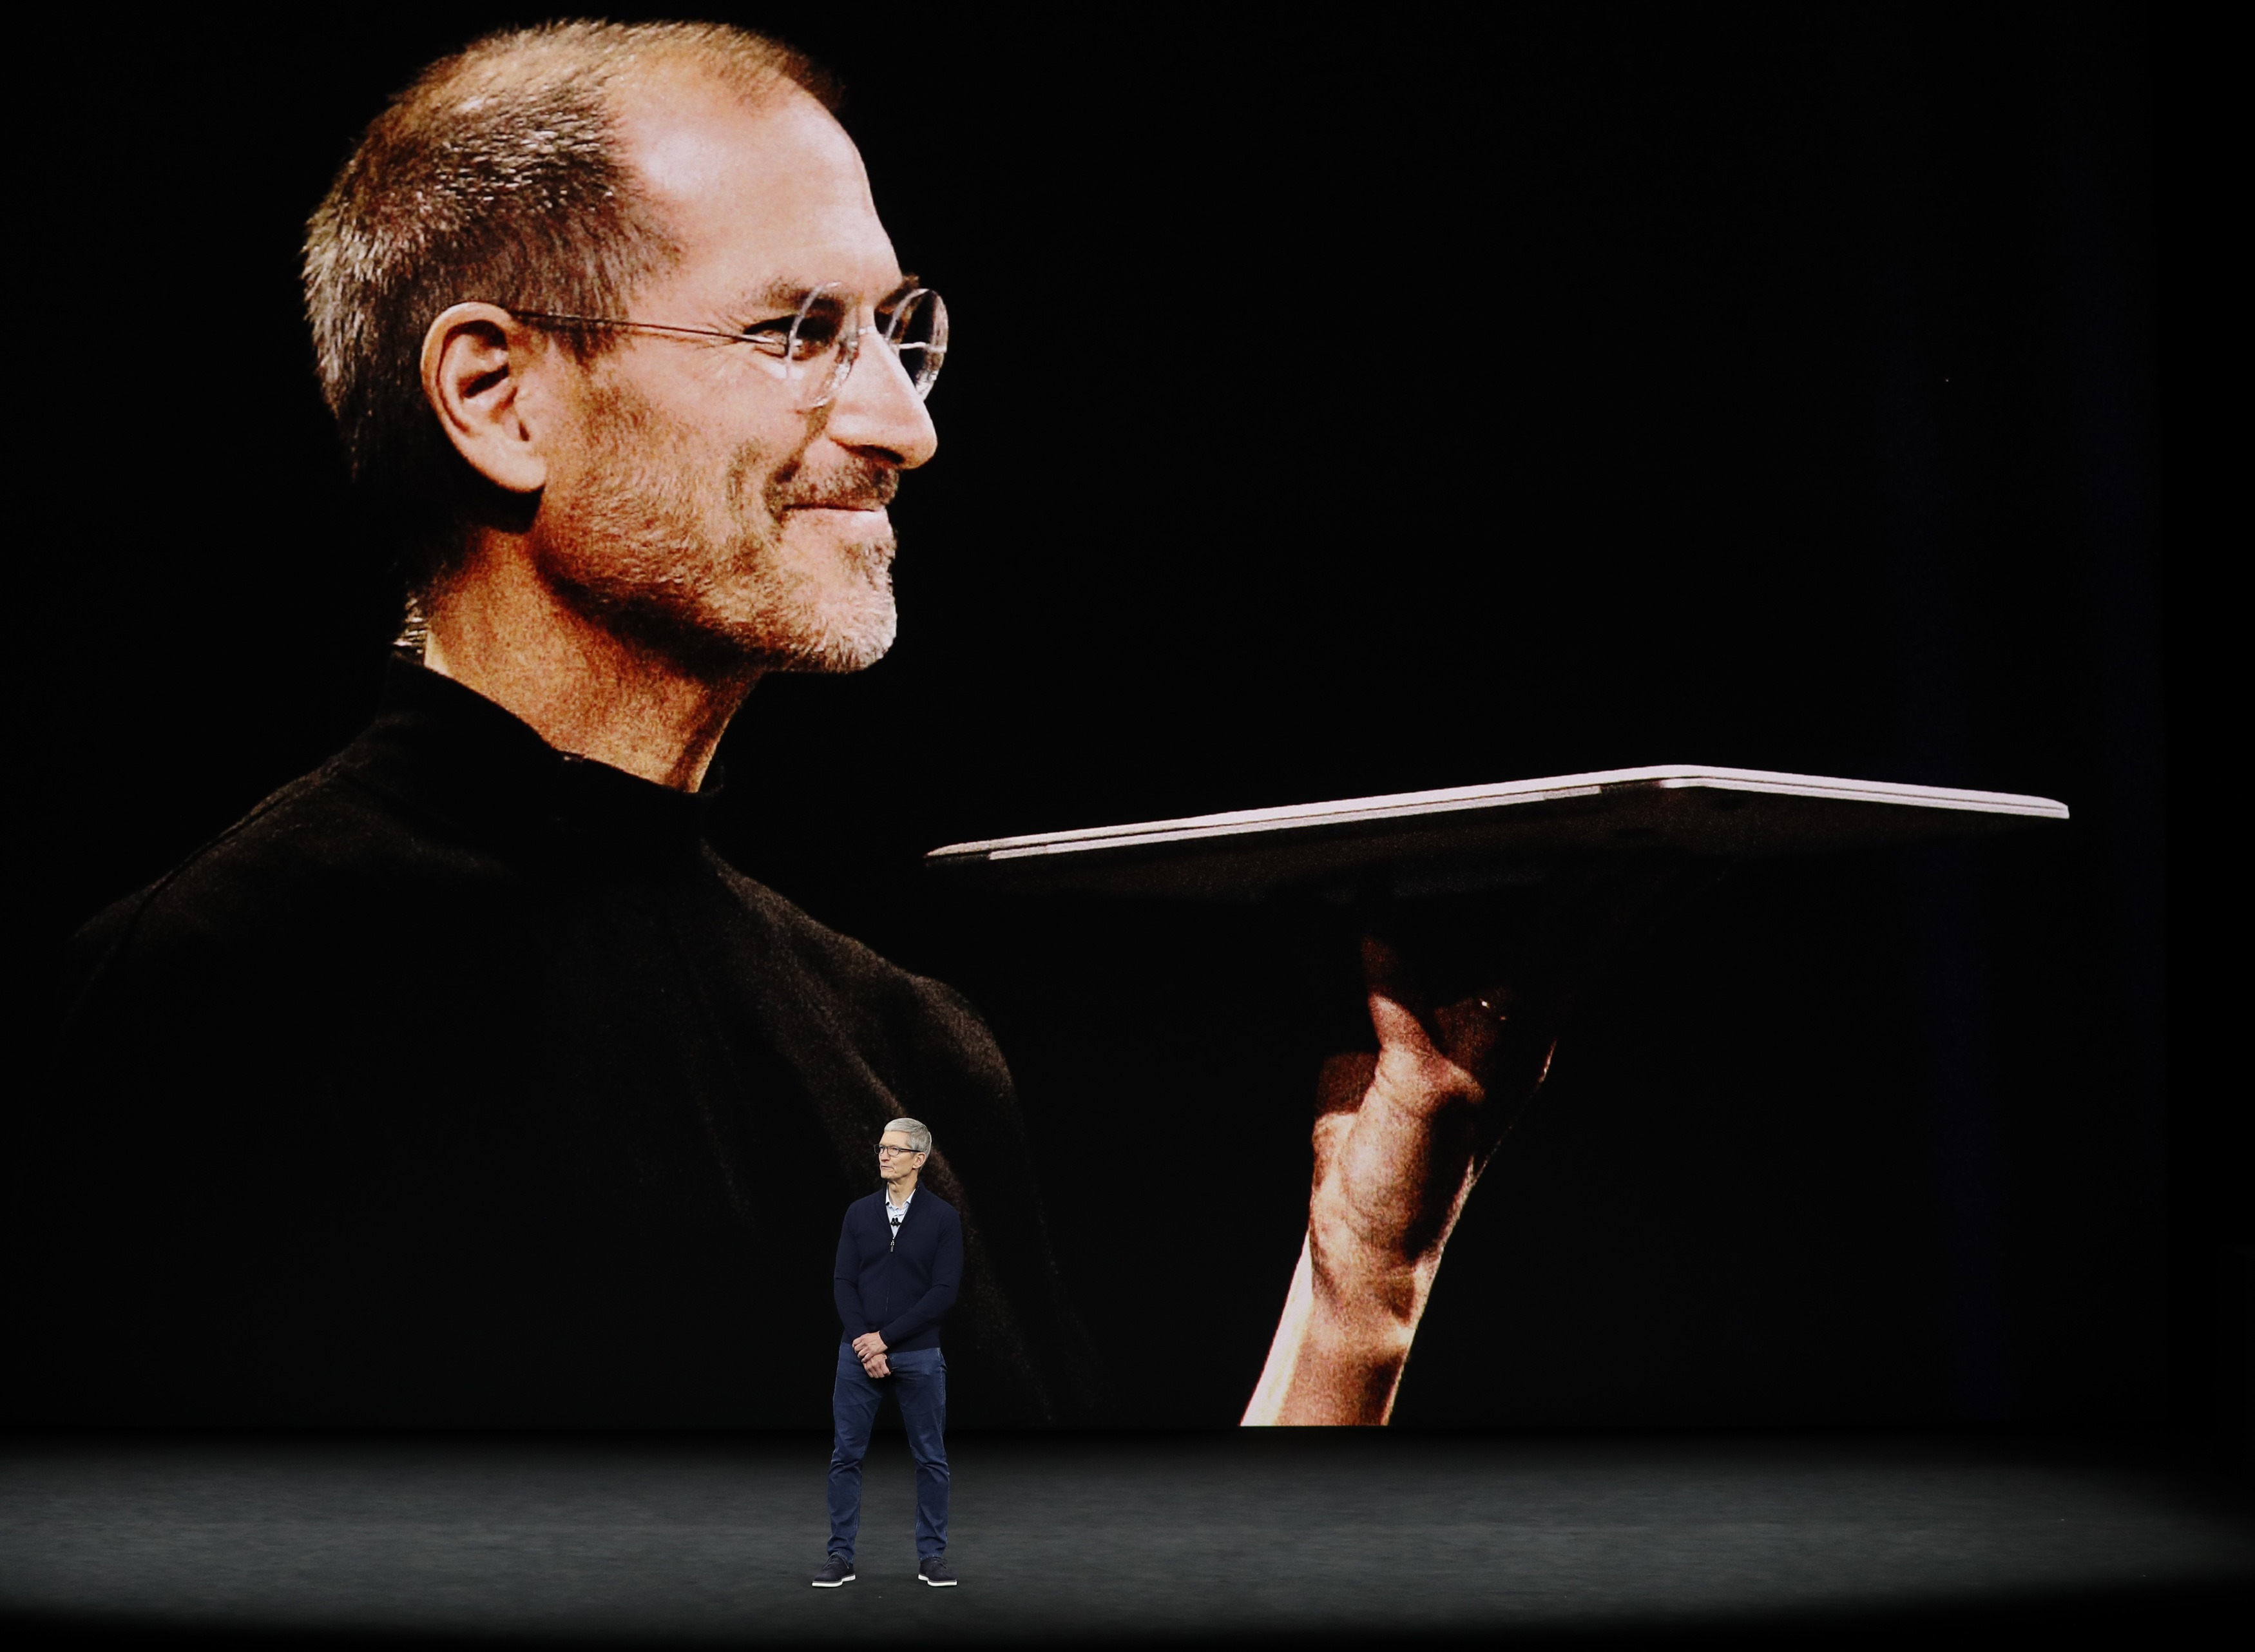 Tim Cook, CEO of Apple, speaks as a tribute video to the late Apple co-founder Steve Jobs plays behind him during a product launch event in Cupertino, Calif., on Sept. 12, 2017. (REUTERS/Stephen Lam)